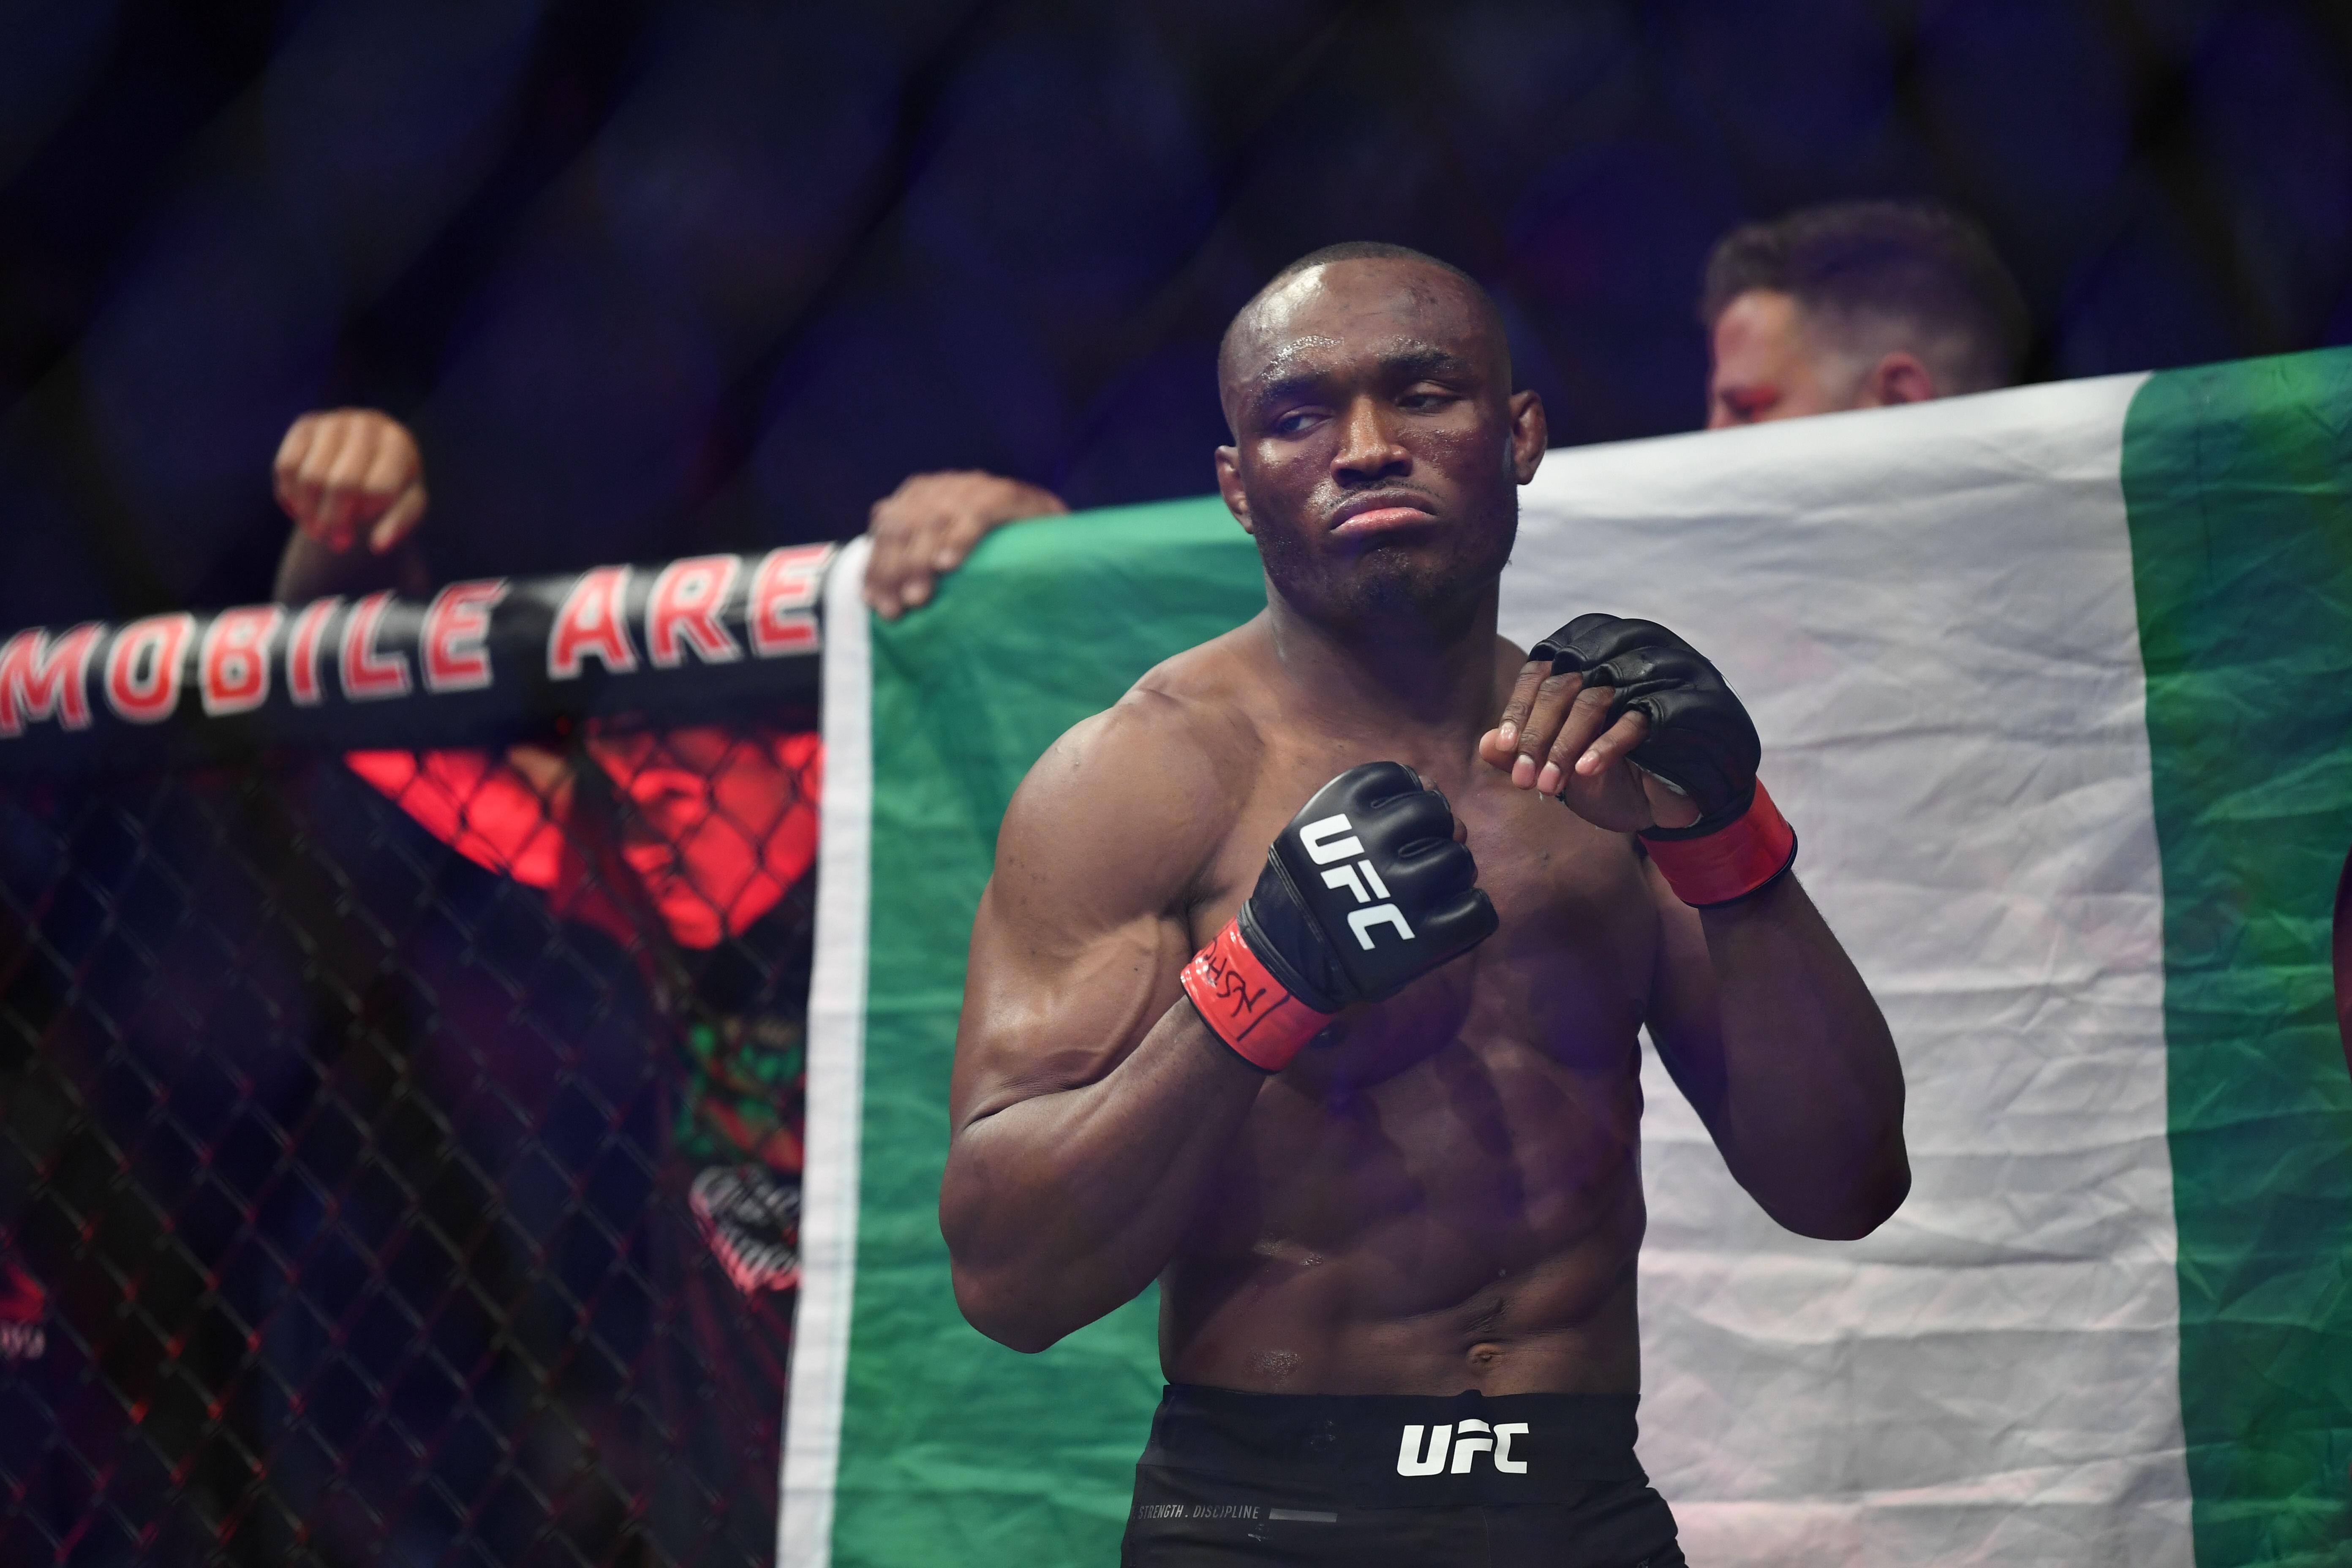 Kamaru Usman looks across the Octagon before his title defence against Colby Covington at UFC 245 at T-Mobile Arena, Las Vegas in 2019. Photo: USA Today